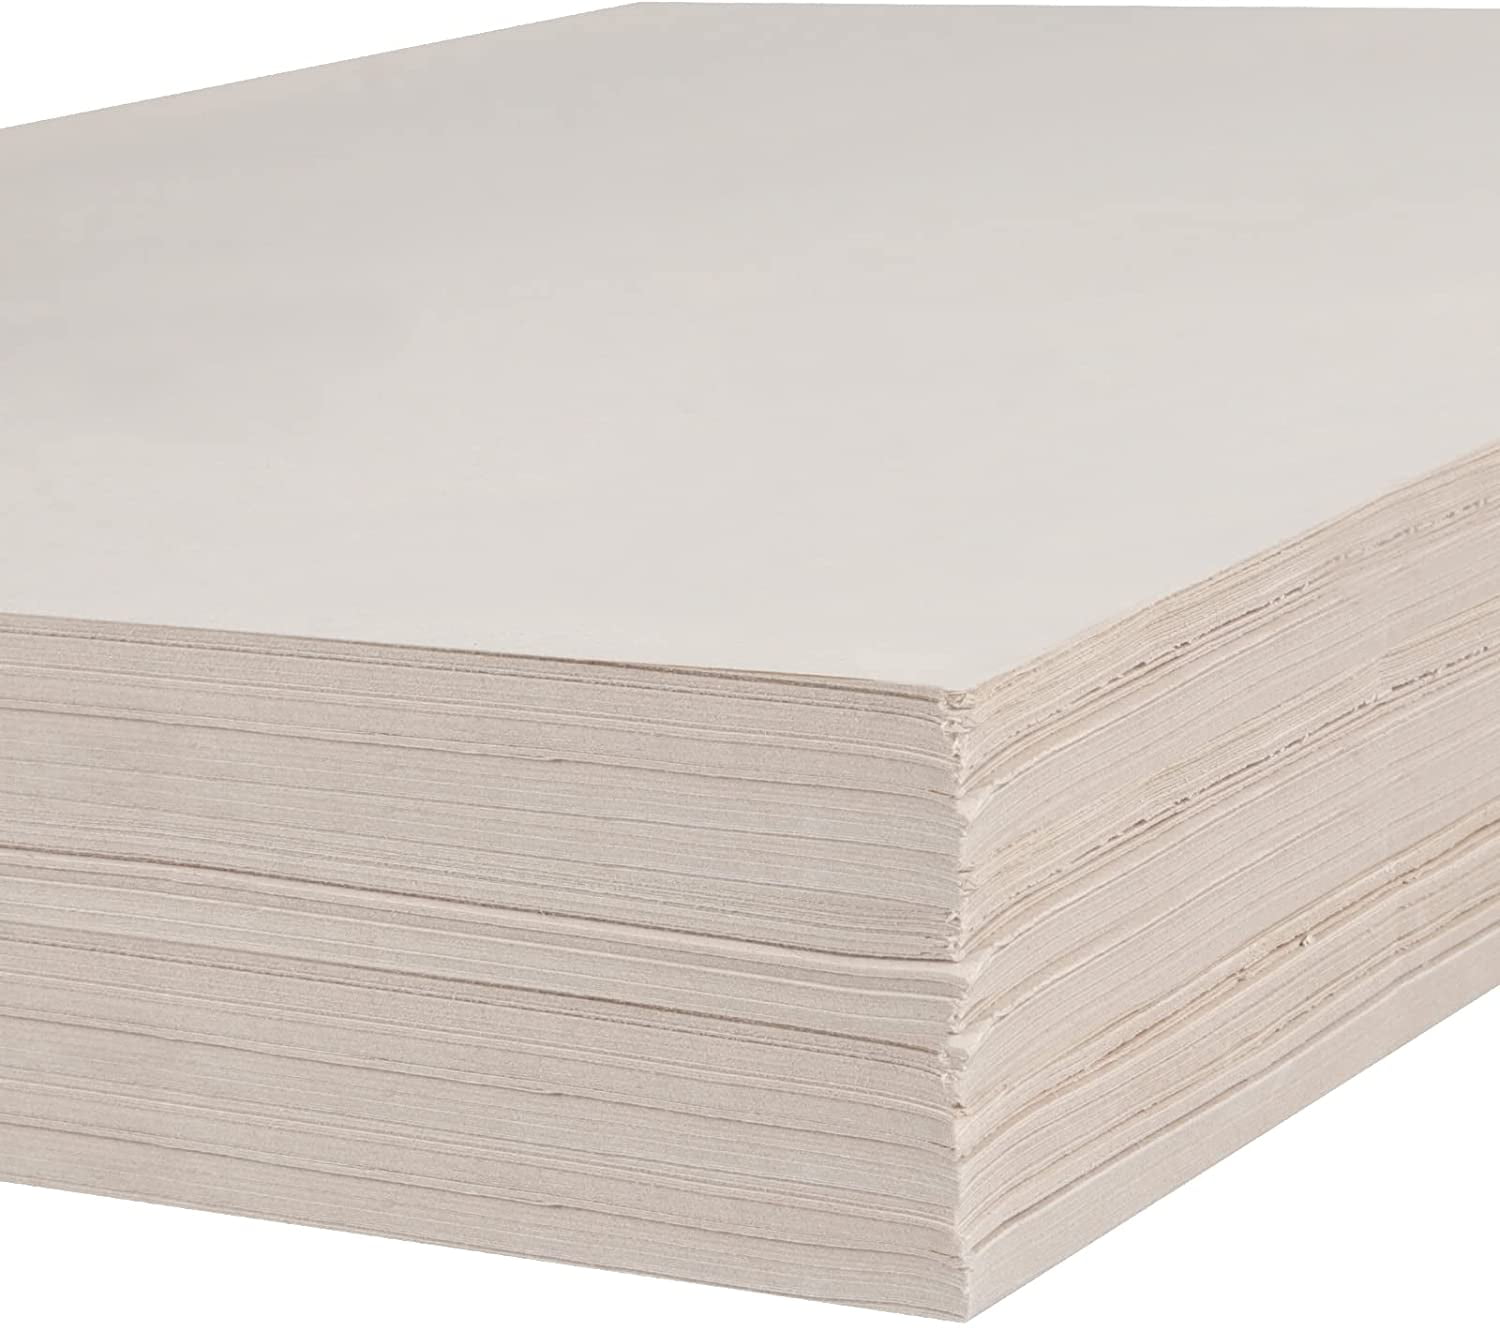 3 Hole Punch white 62330 Loose Leaf Notebook Paper for 3 Ring Binders Oxford Filler Paper 5 Packs of 100 sheets 8 x 10-1/2 Inch Wide Ruled Paper 